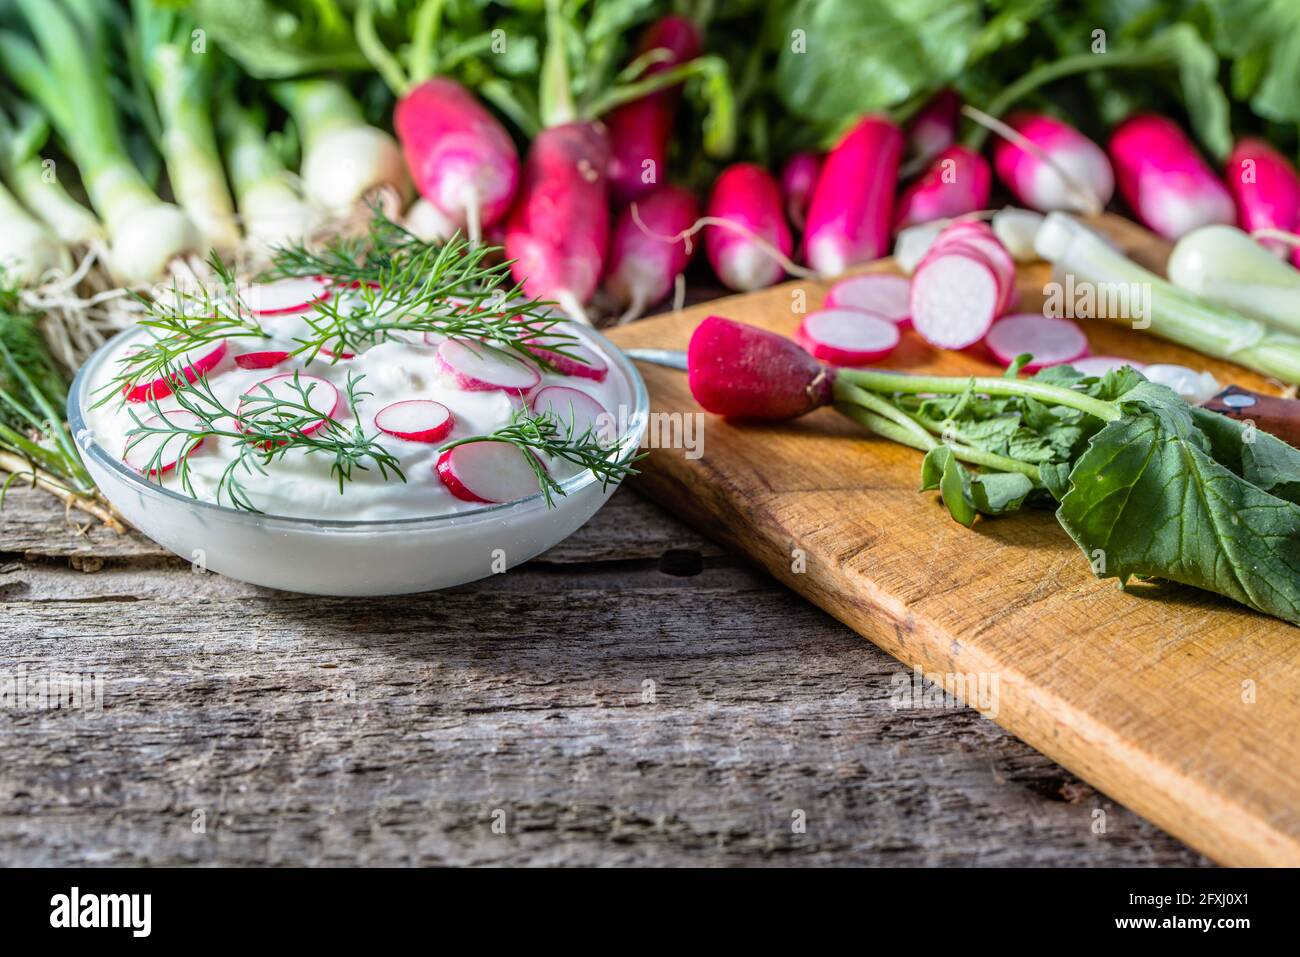 Dietary breakfast, cottage cheese with radish, healthy vegetarian food concept Stock Photo